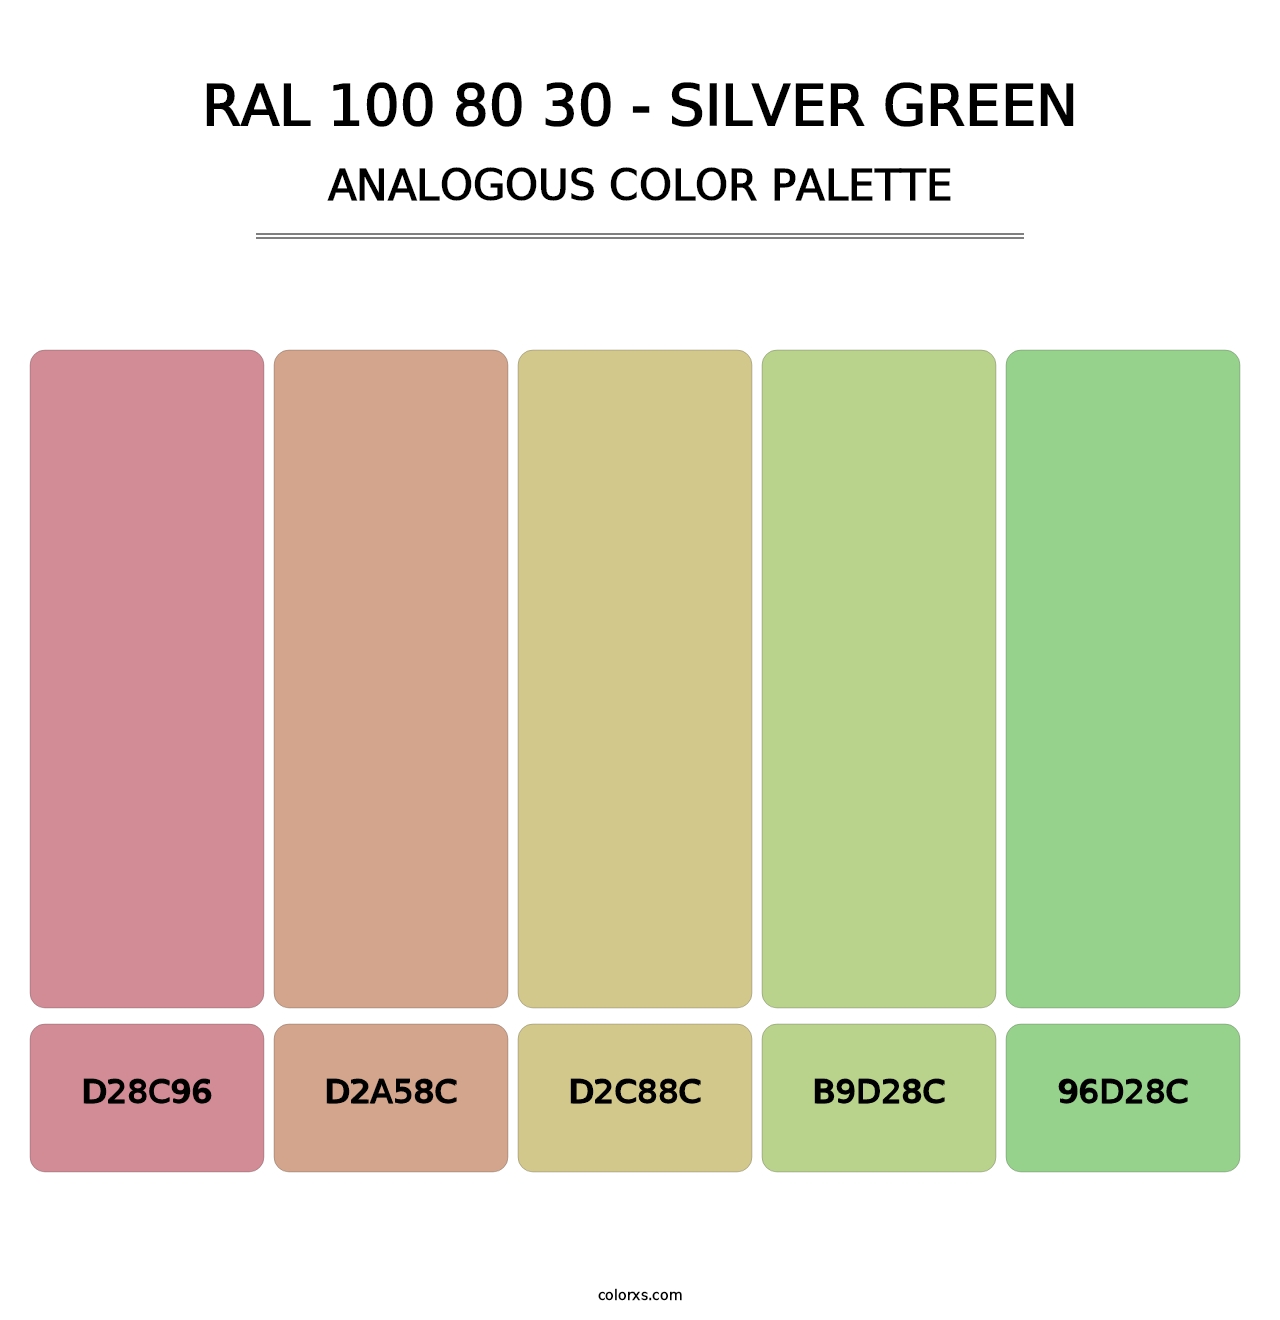 RAL 100 80 30 - Silver Green - Analogous Color Palette